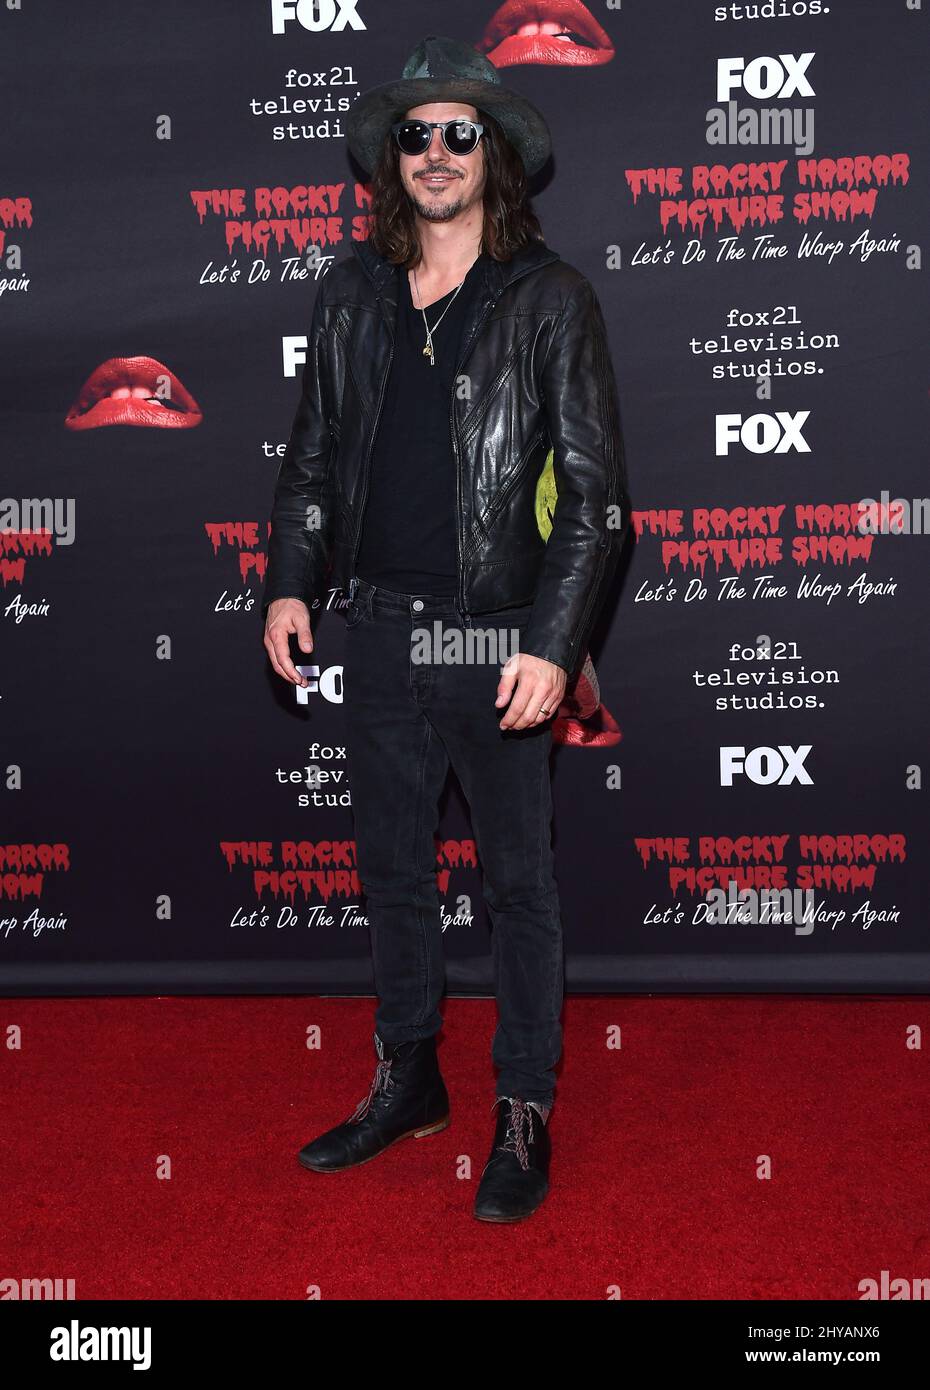 Cisco Adler attending the Rocky Horror Picture Show: Let's Do The Time Warp Again Premiere held at The Roxy, in Los Angeles, California. Stock Photo